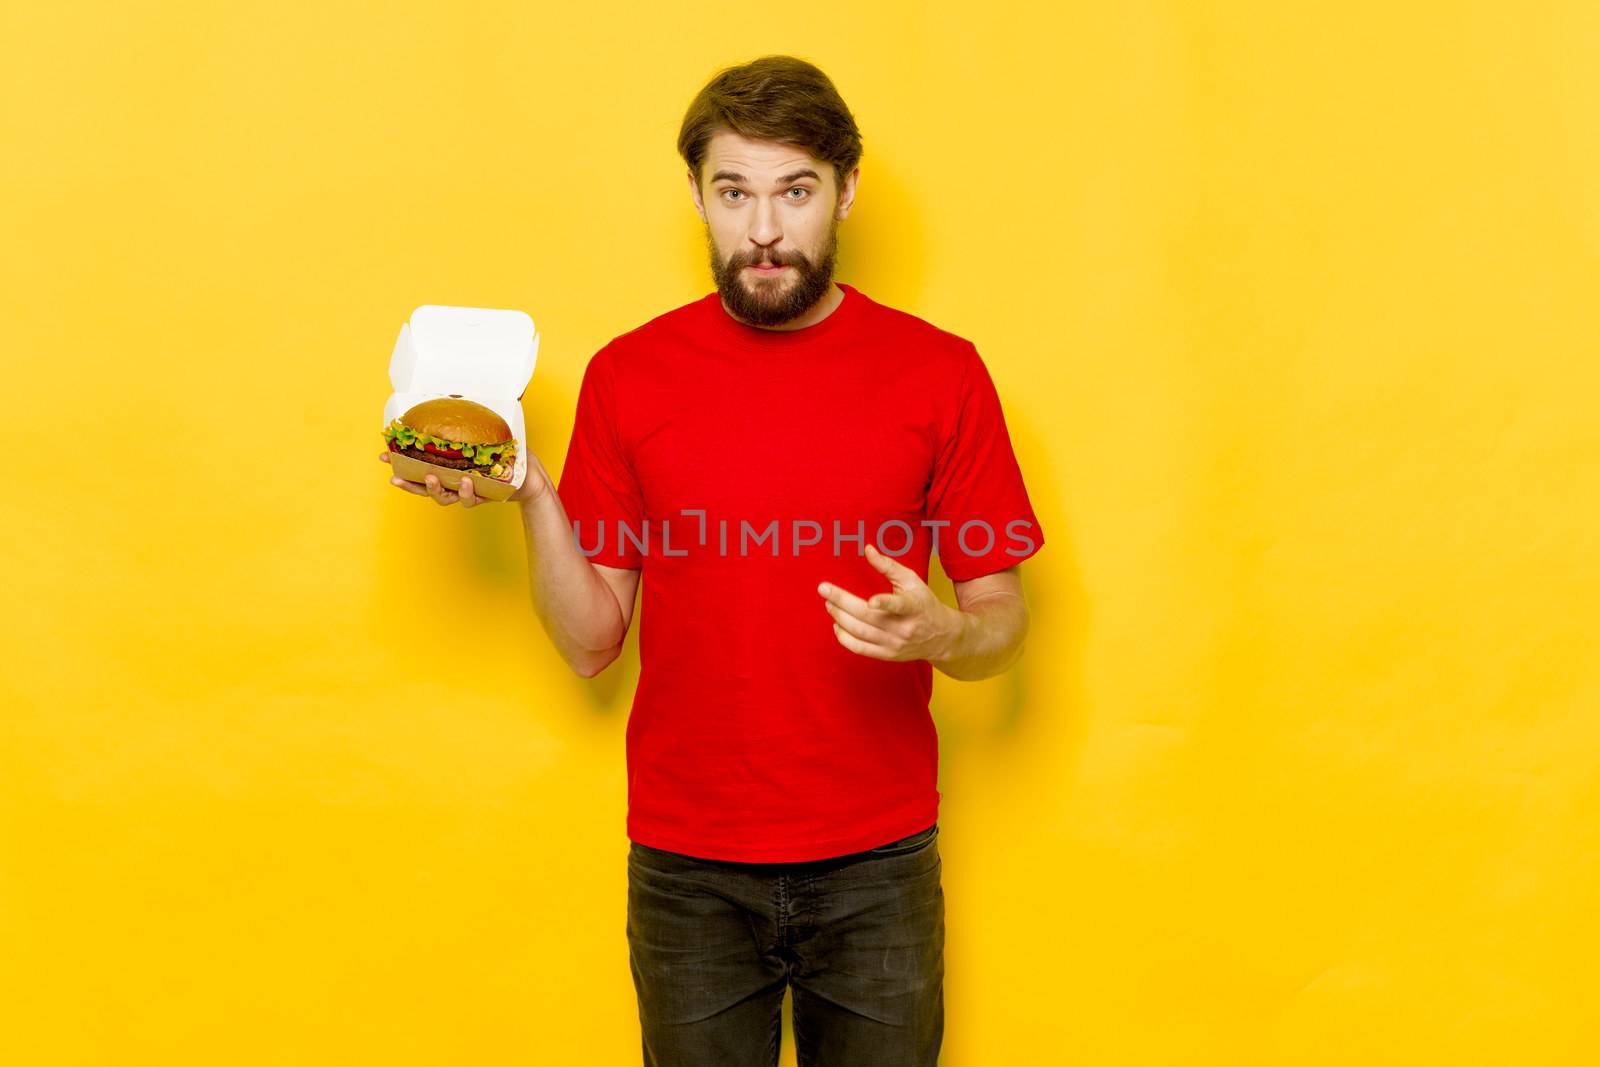 Hamburgers in a box and an emotional man in a red T-shirt on a background by SHOTPRIME